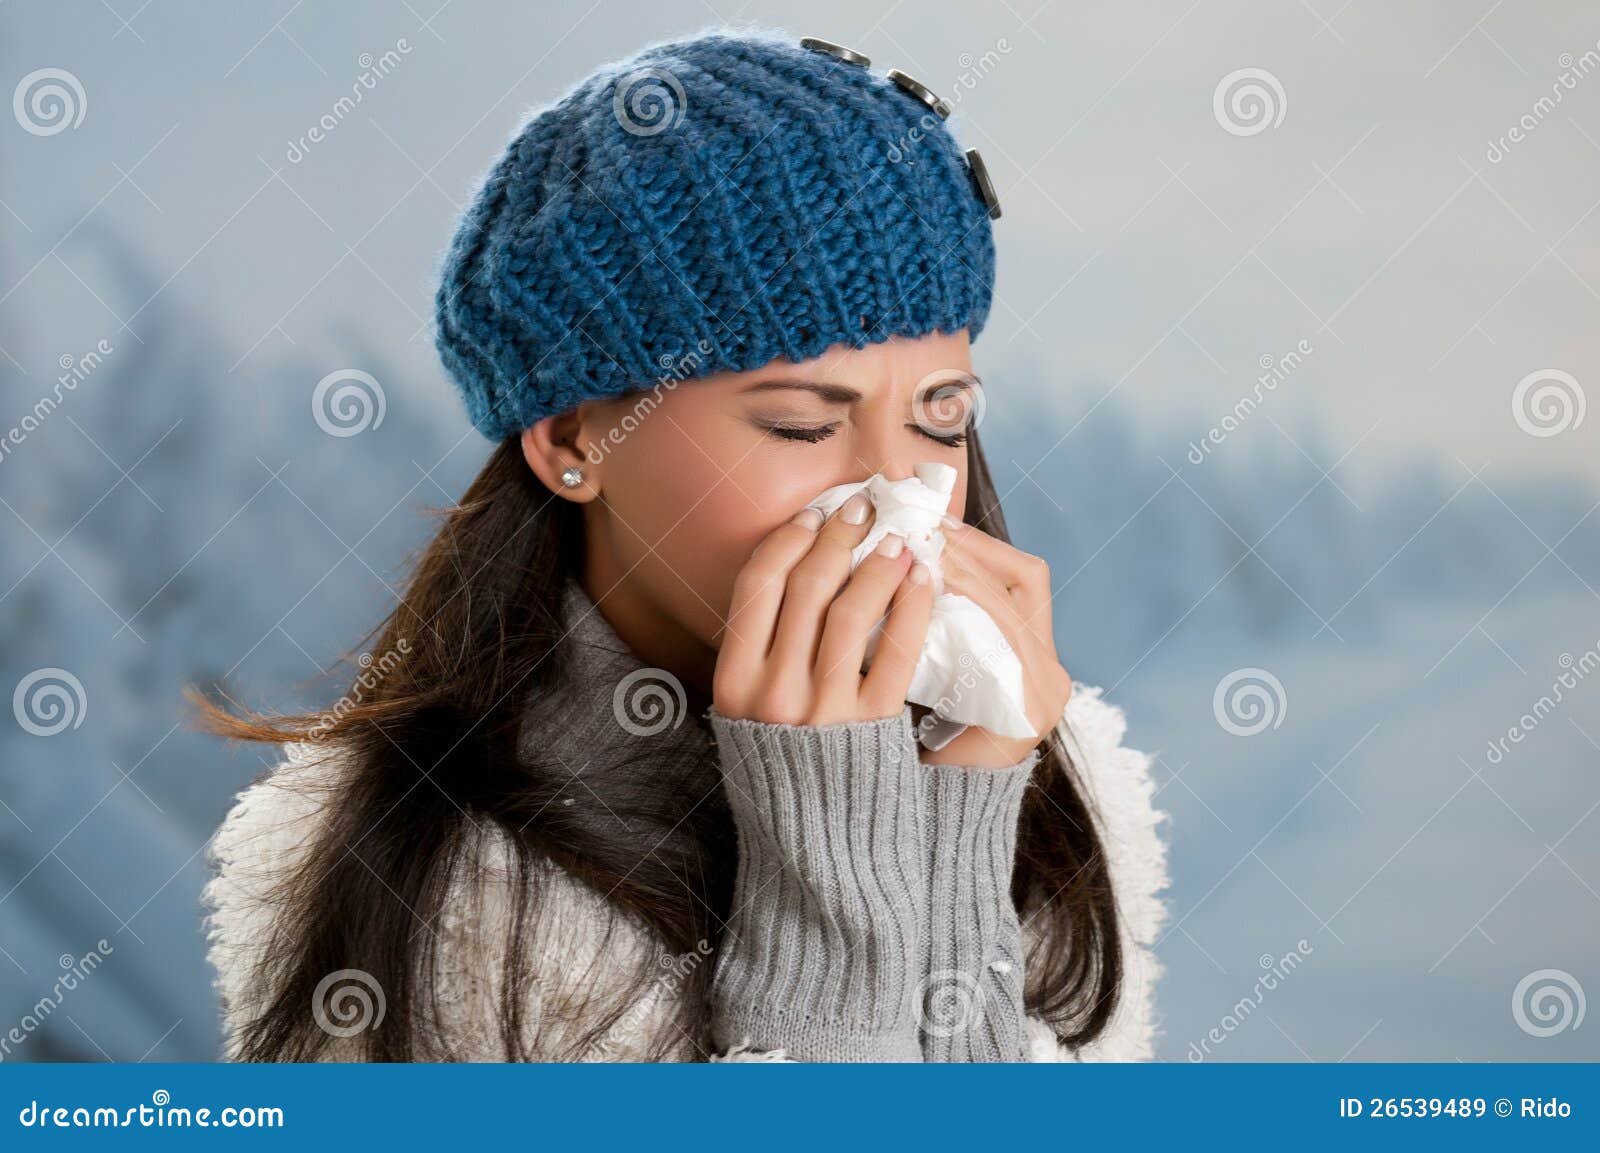 winter flu and fever